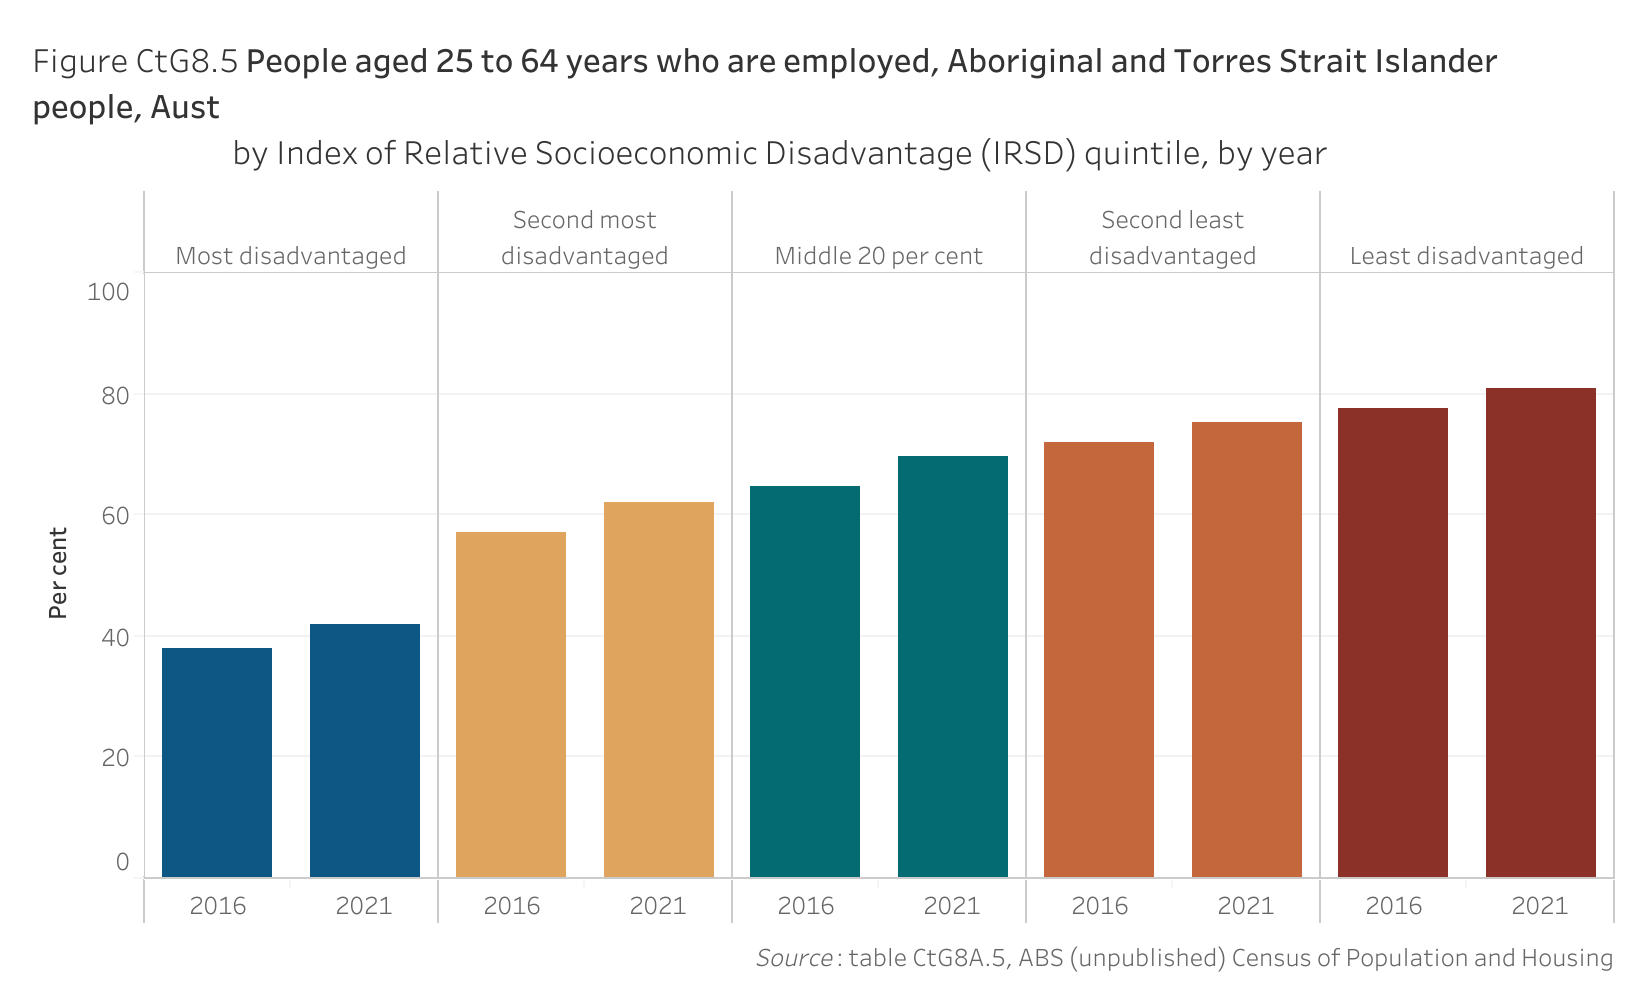 Figure CtG8.5 shows people aged 25 to 64 years who are employed, Aboriginal and Torres Strait Islander people, Australia, by Index of Relative Socioeconomic Disadvantage quintile, by year. More details can be found within the text near this image.